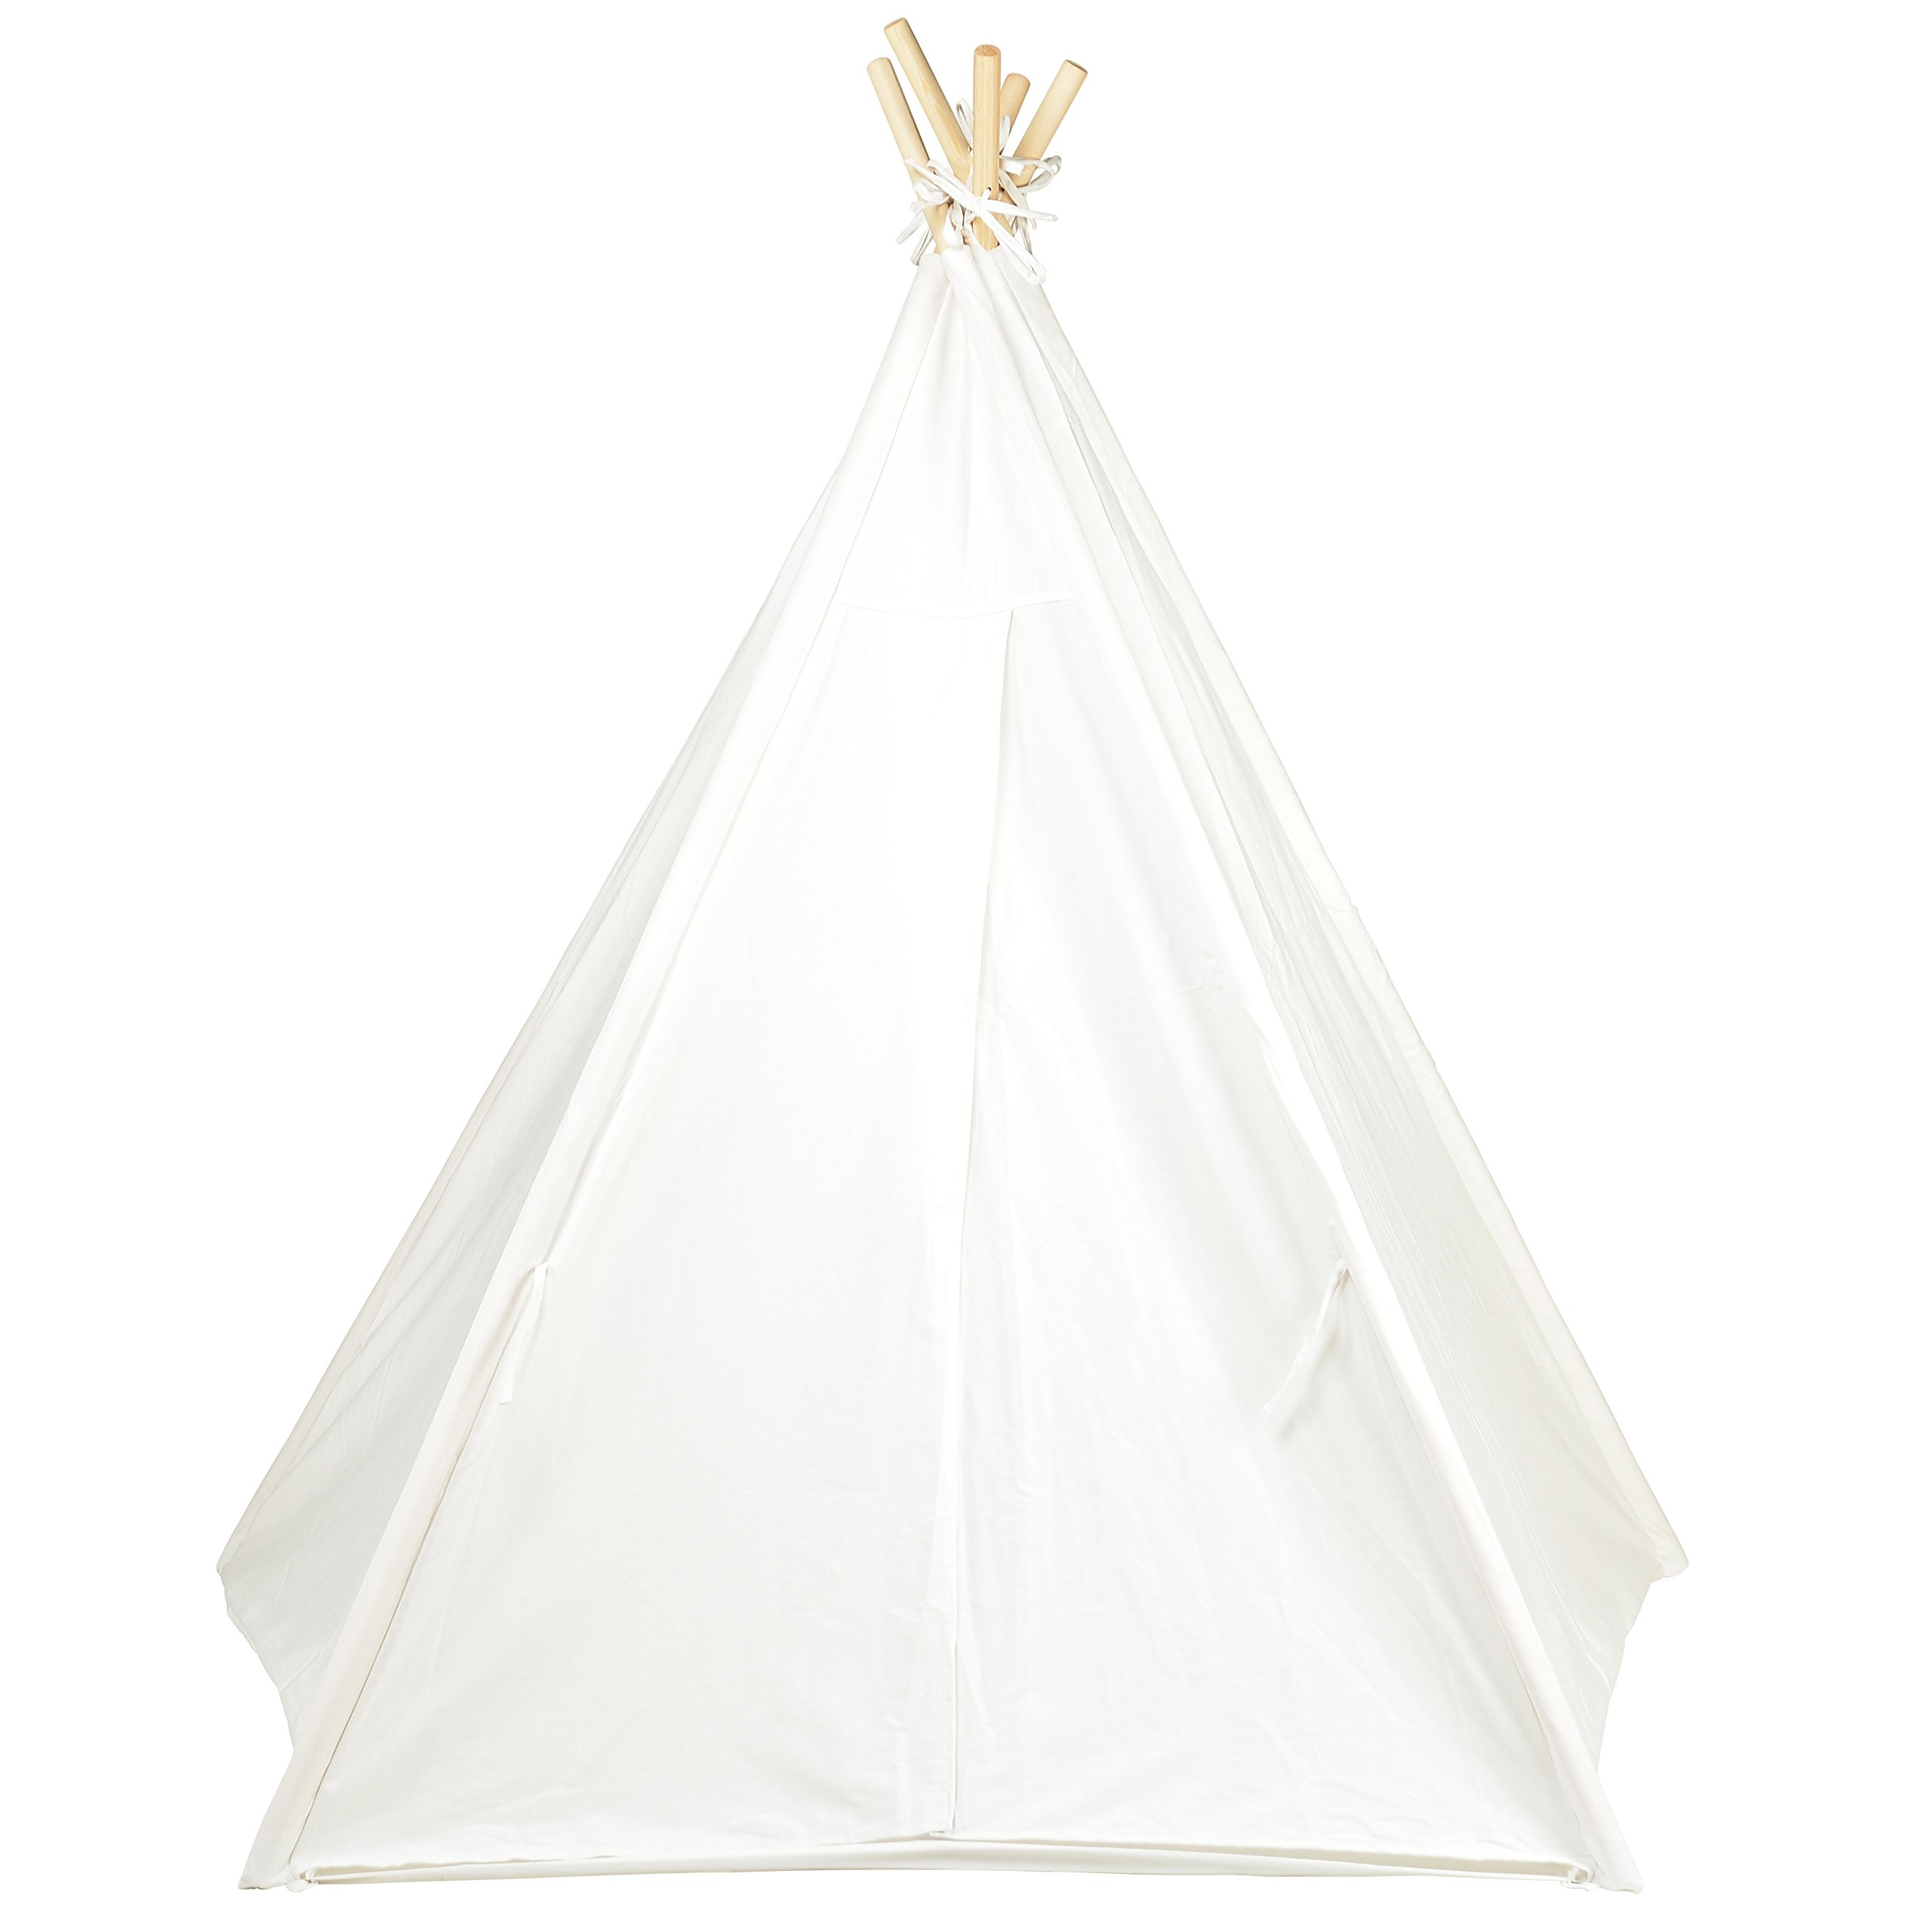 6' Giant Teepee Play House of Pine Wood with Carry Case by Trademark Innovations (White)